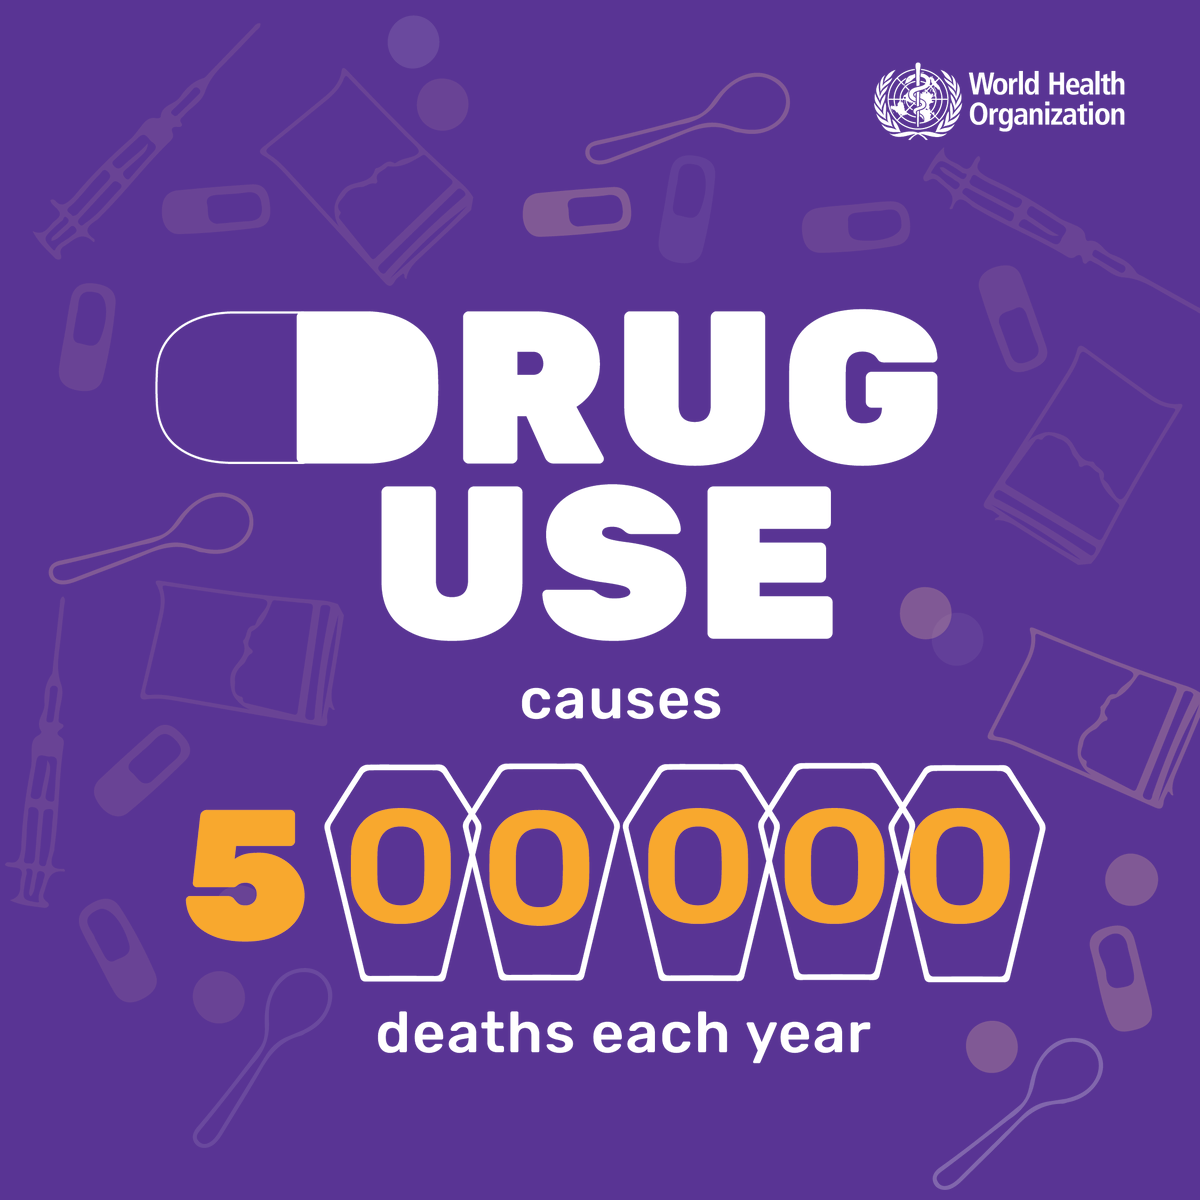 Today is International Day against Drug Abuse & Illicit Trafficking.

Globally, nearly 500000 deaths are linked to drug use each year. WHO works with countries & partners to prevent & reduce the extensive harms caused to individuals, families & communities by drug use & drug use…